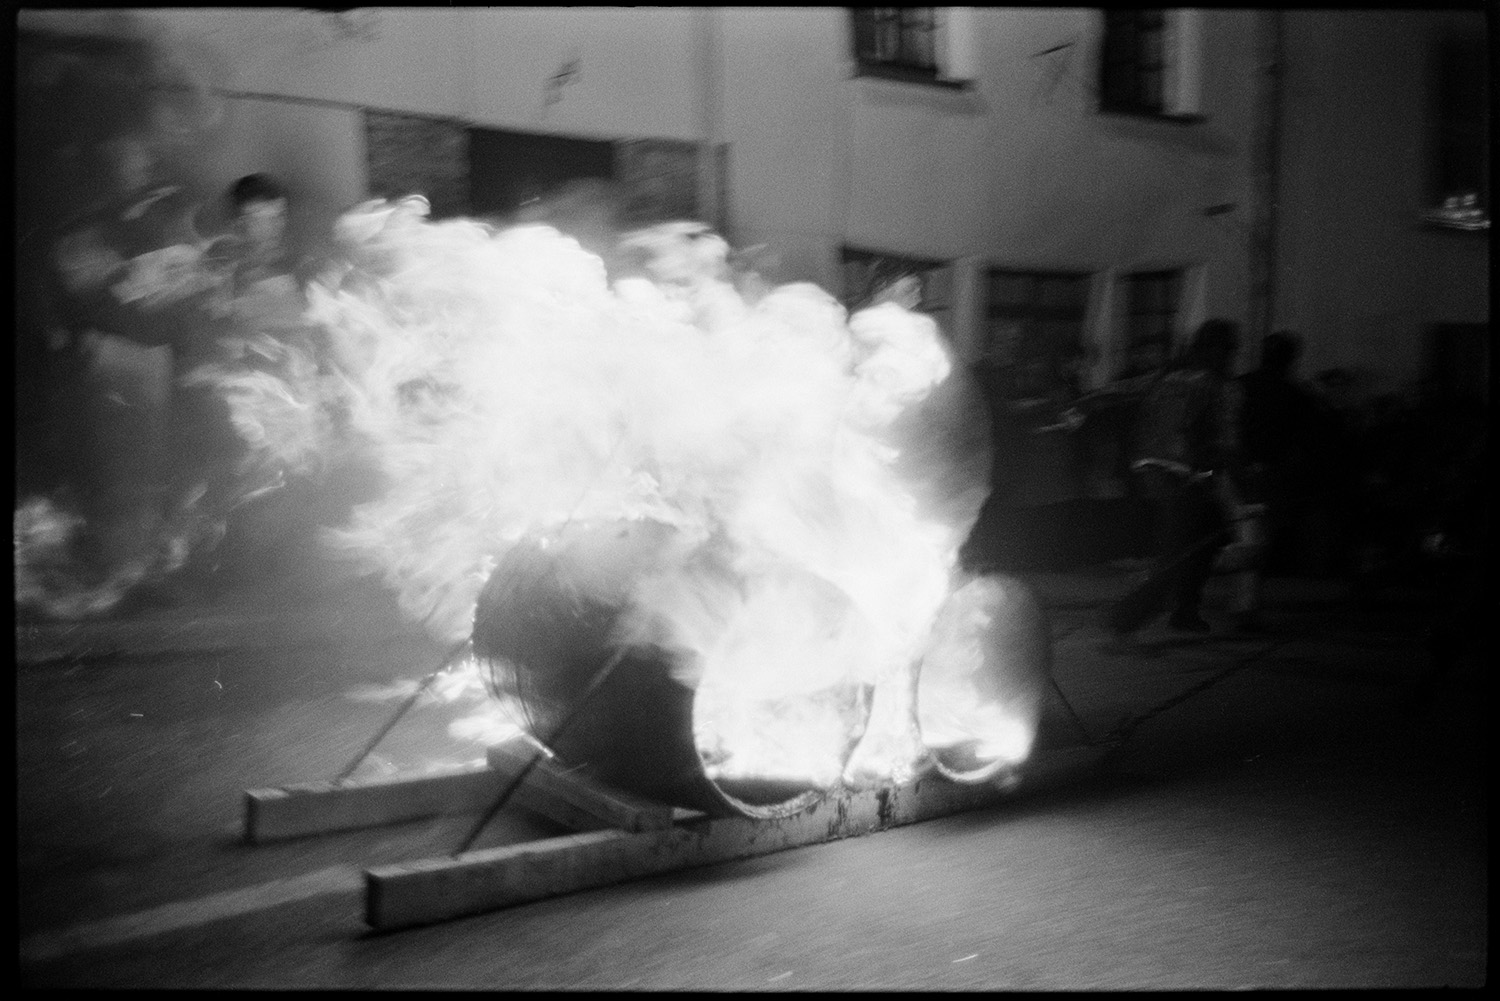 Carnival procession at night with burning torches and blazing tar barrels, floats.
[Two burning tar barrels ablaze on the street during the evening procession at Hatherleigh Carnival.]